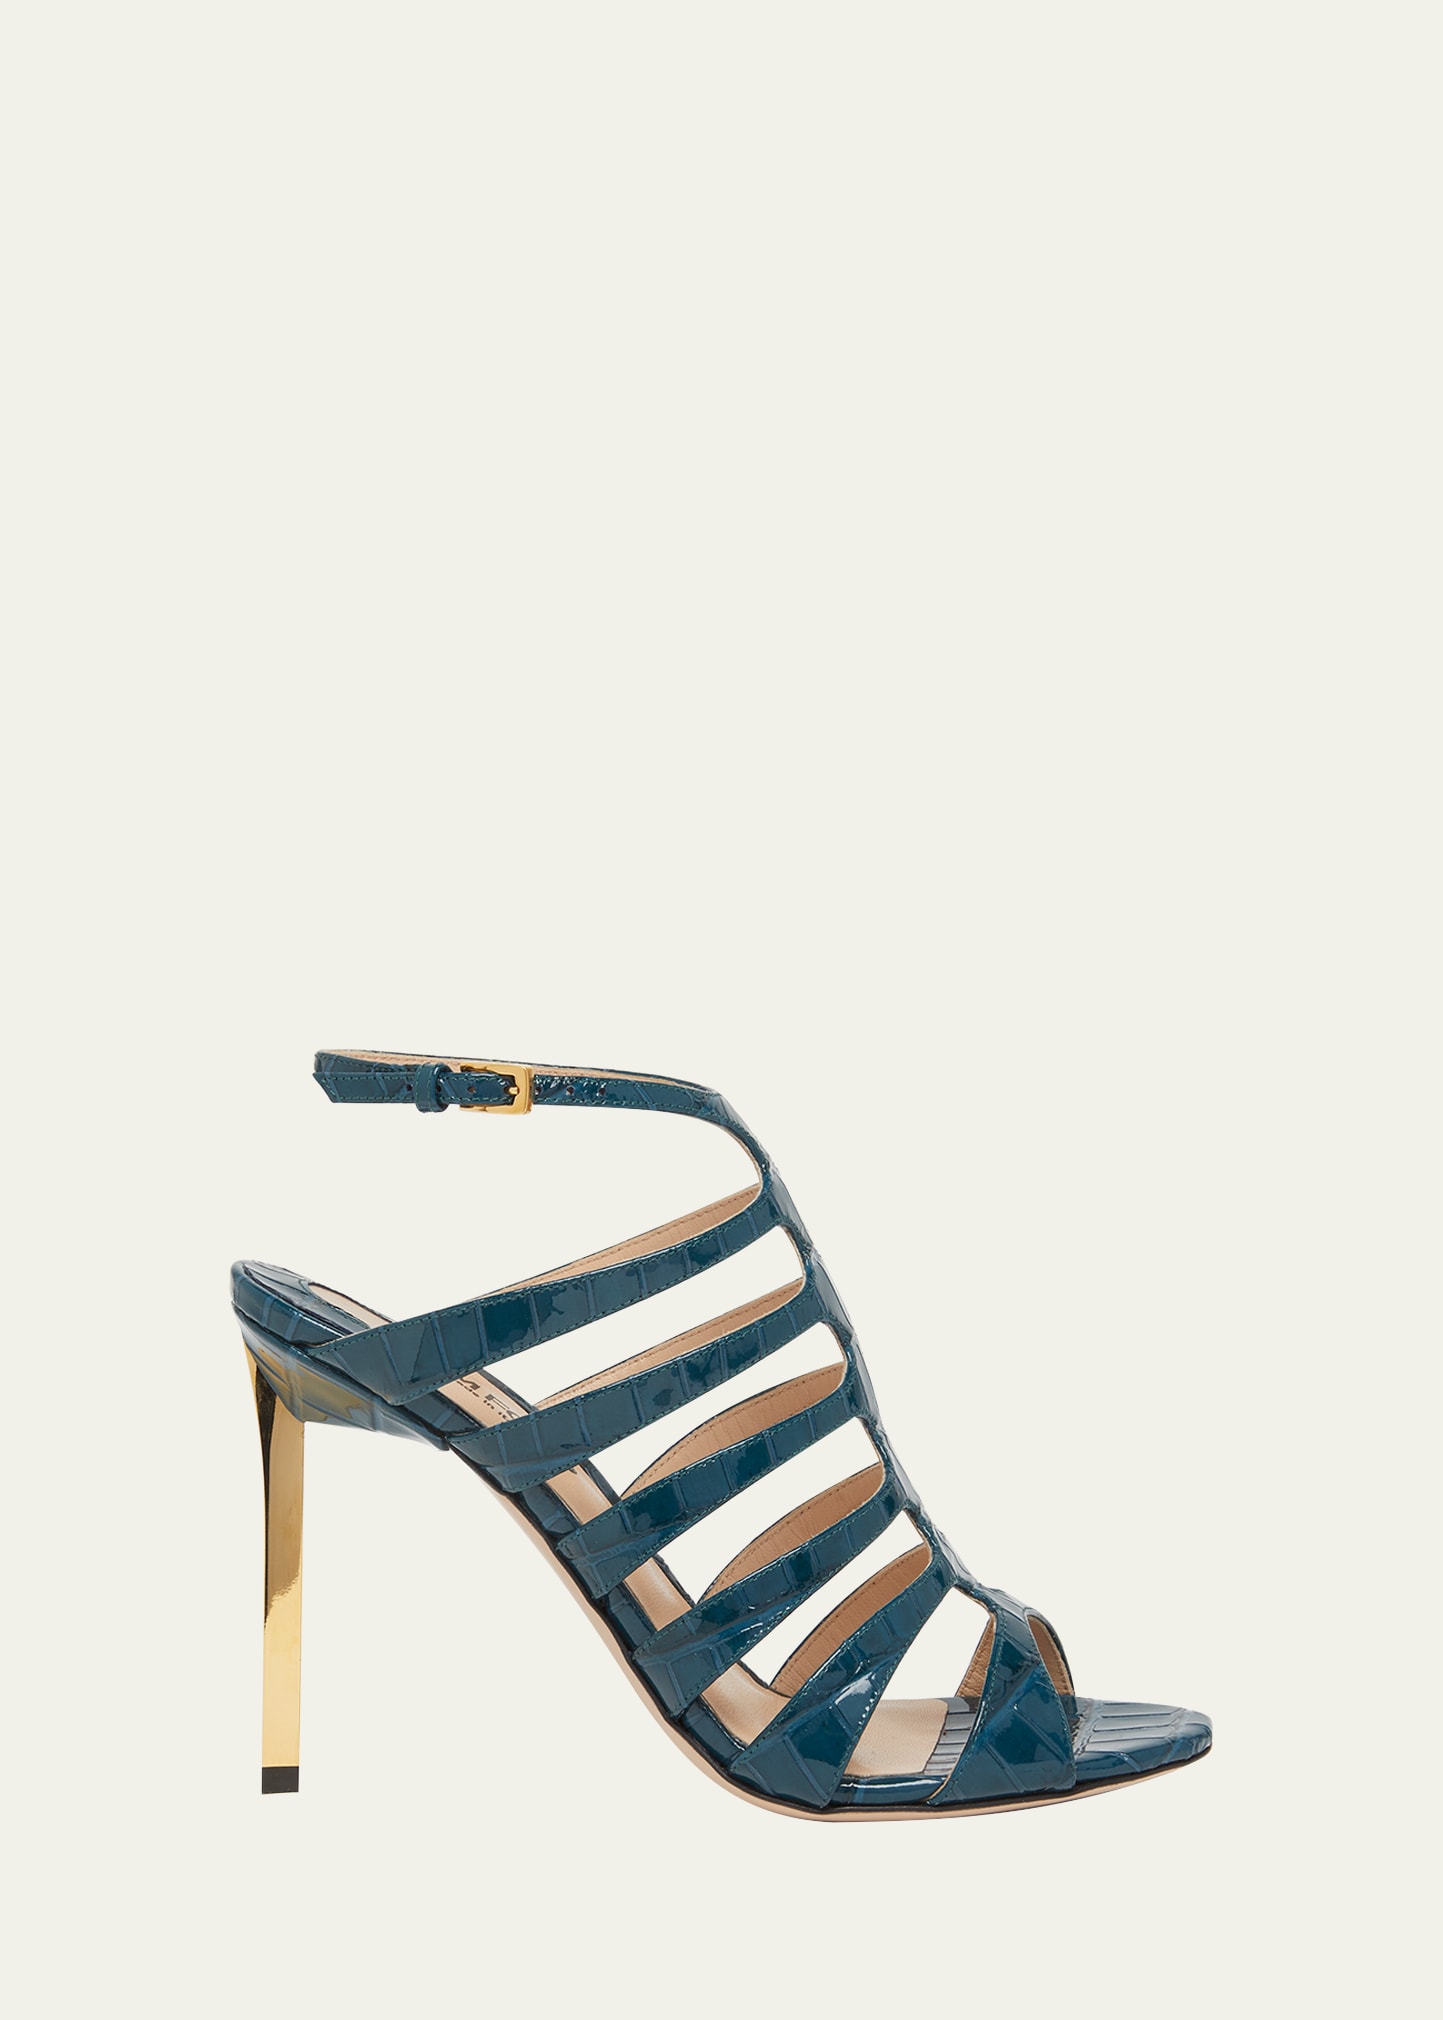 TOM FORD CROCO CAGED STILETTO SLINGBACK SANDALS